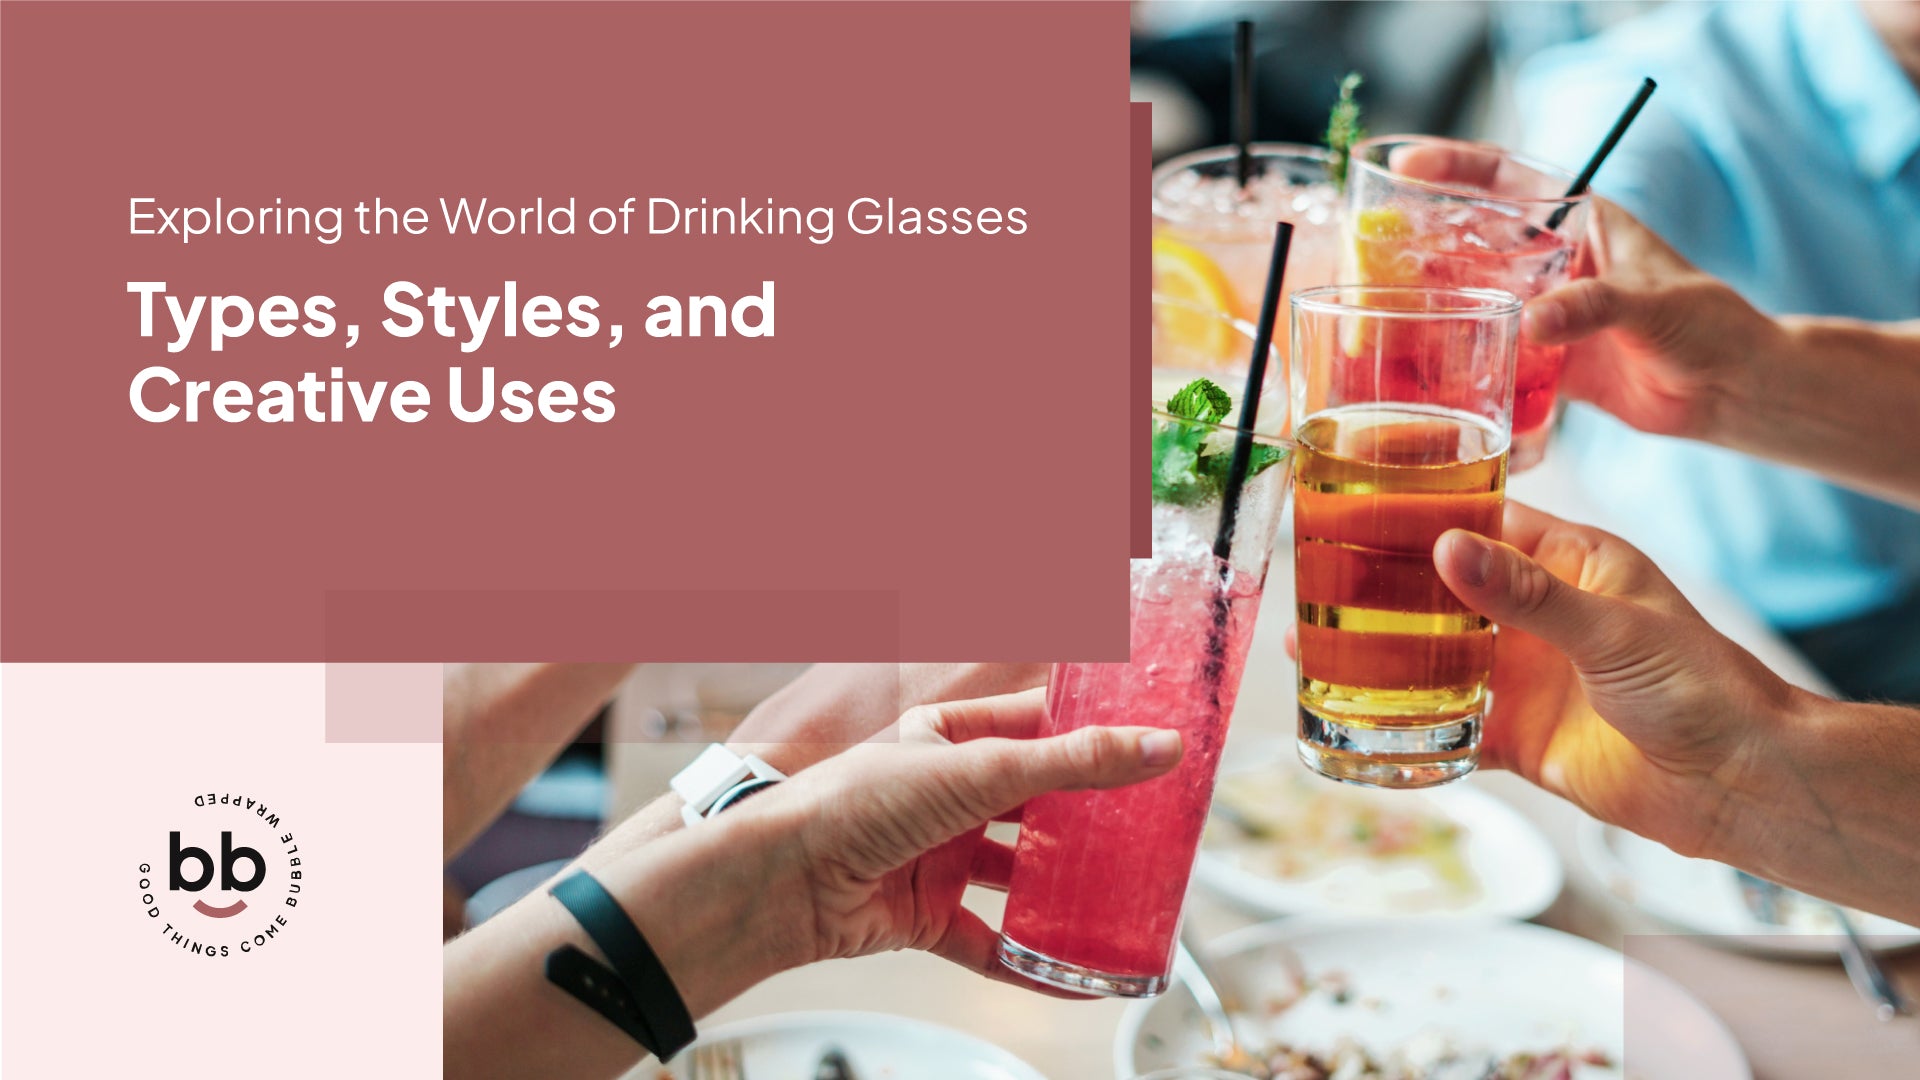 Exploring the World of Drinking Glasses: Types, Styles, and Creative Uses